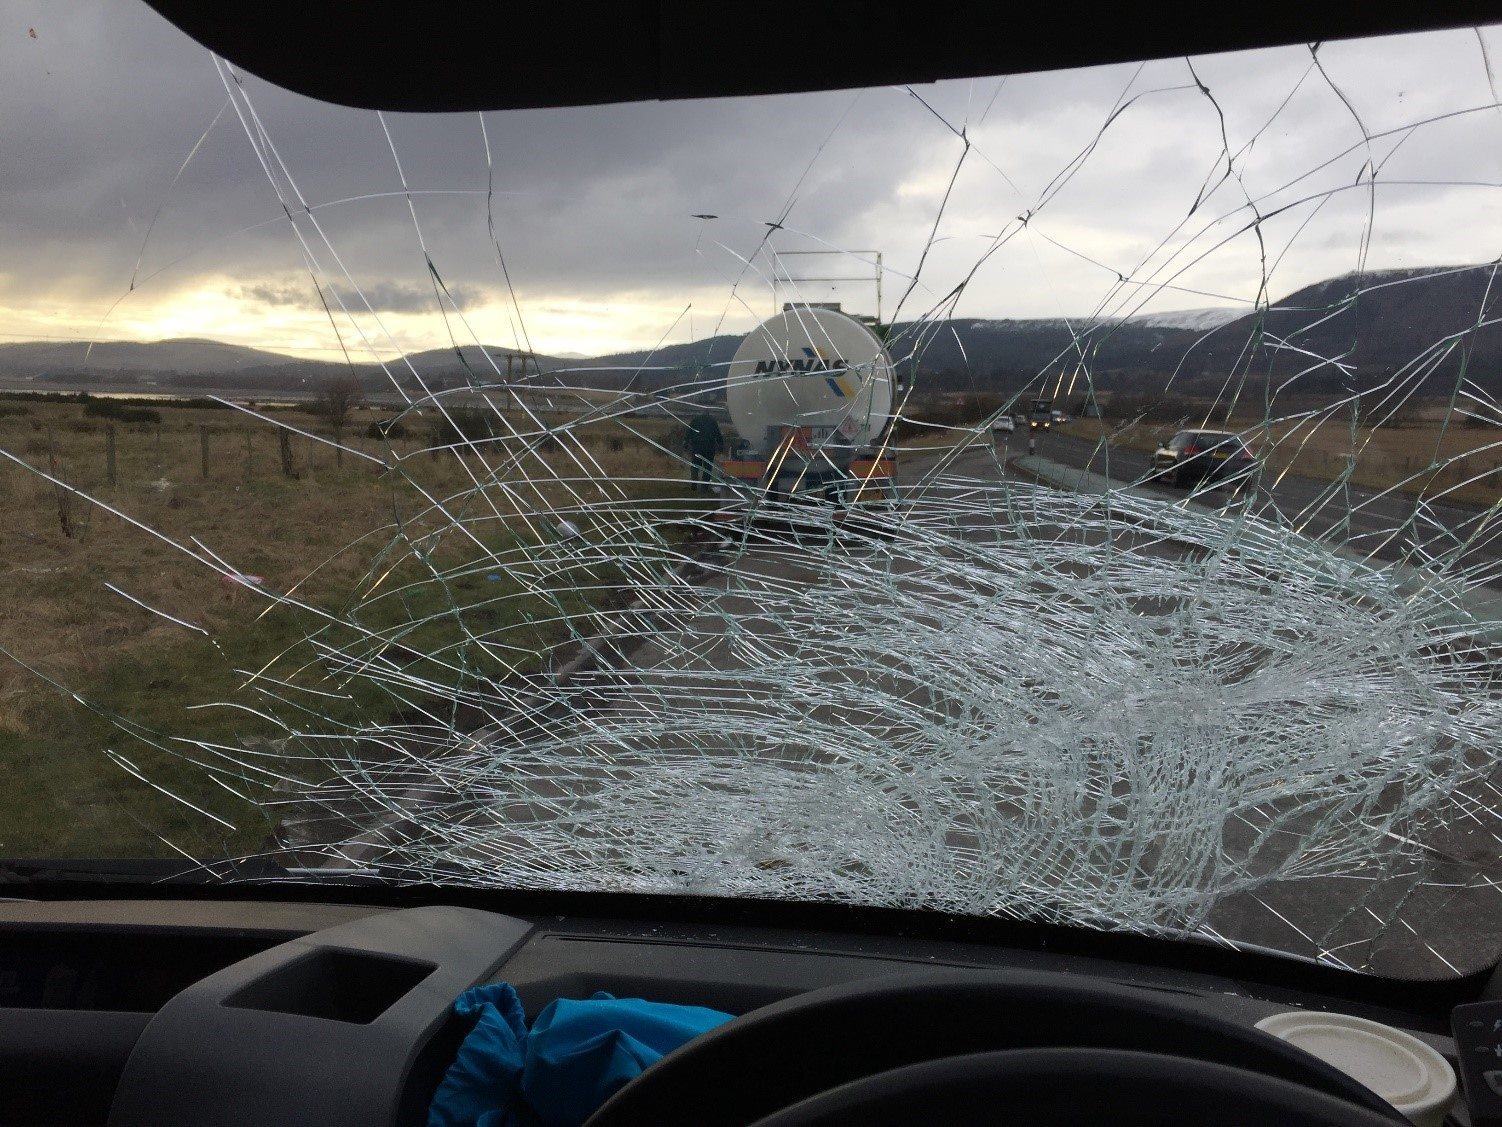 The van was travelling between Brora in Sutherland and Elgin in Moray when it was stopped on the A9 at Tomich near Invergordon.